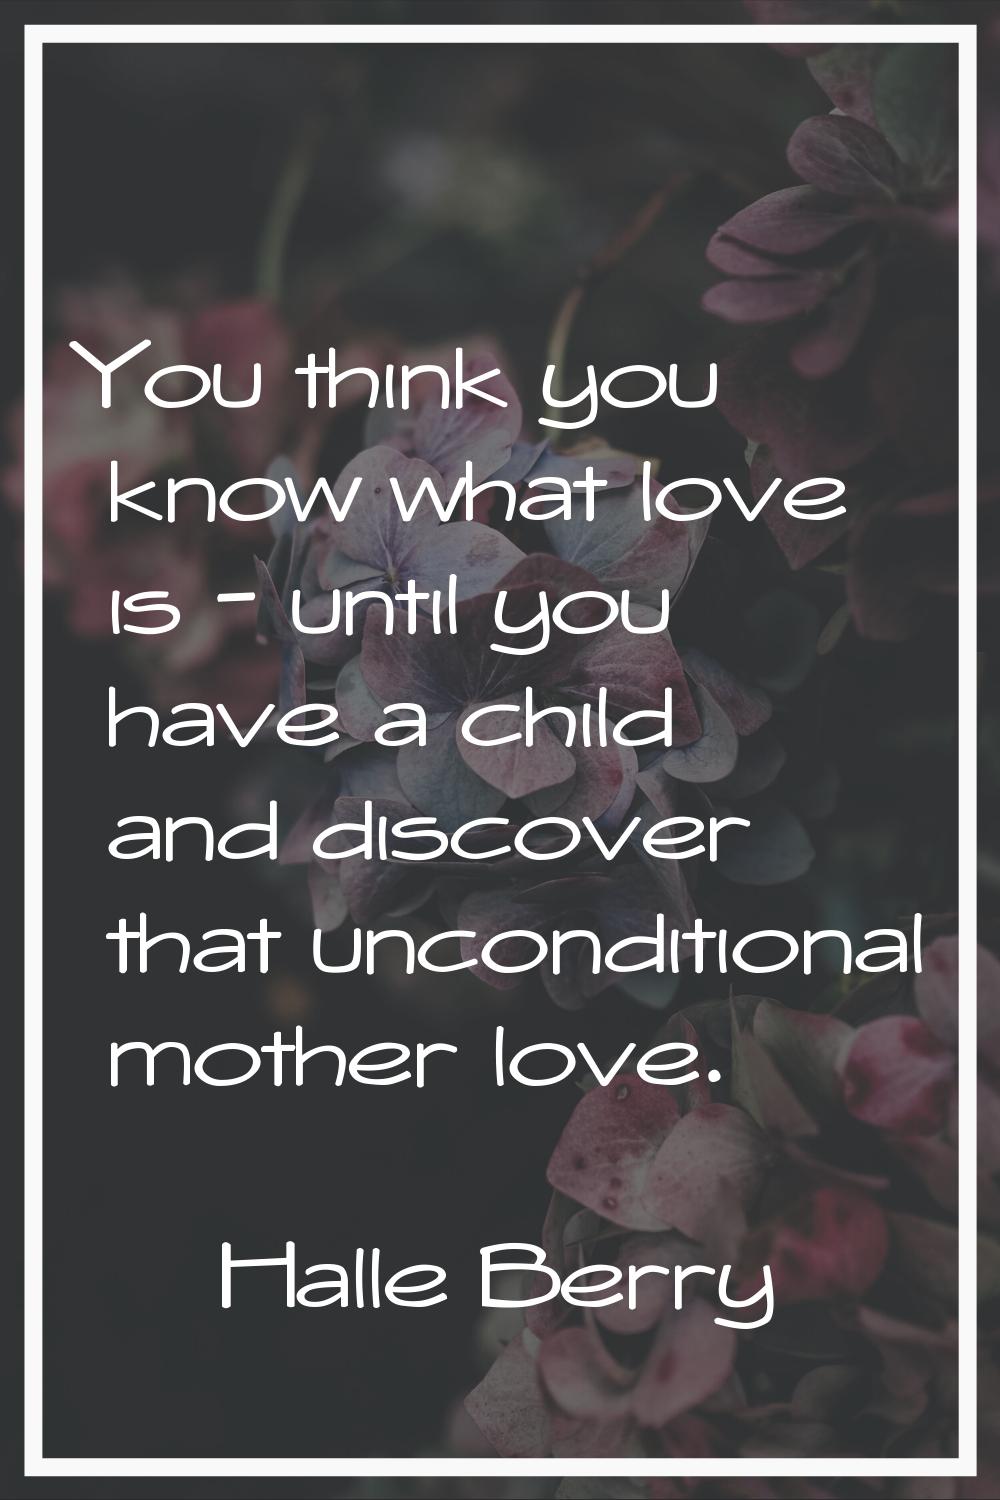 You think you know what love is - until you have a child and discover that unconditional mother lov